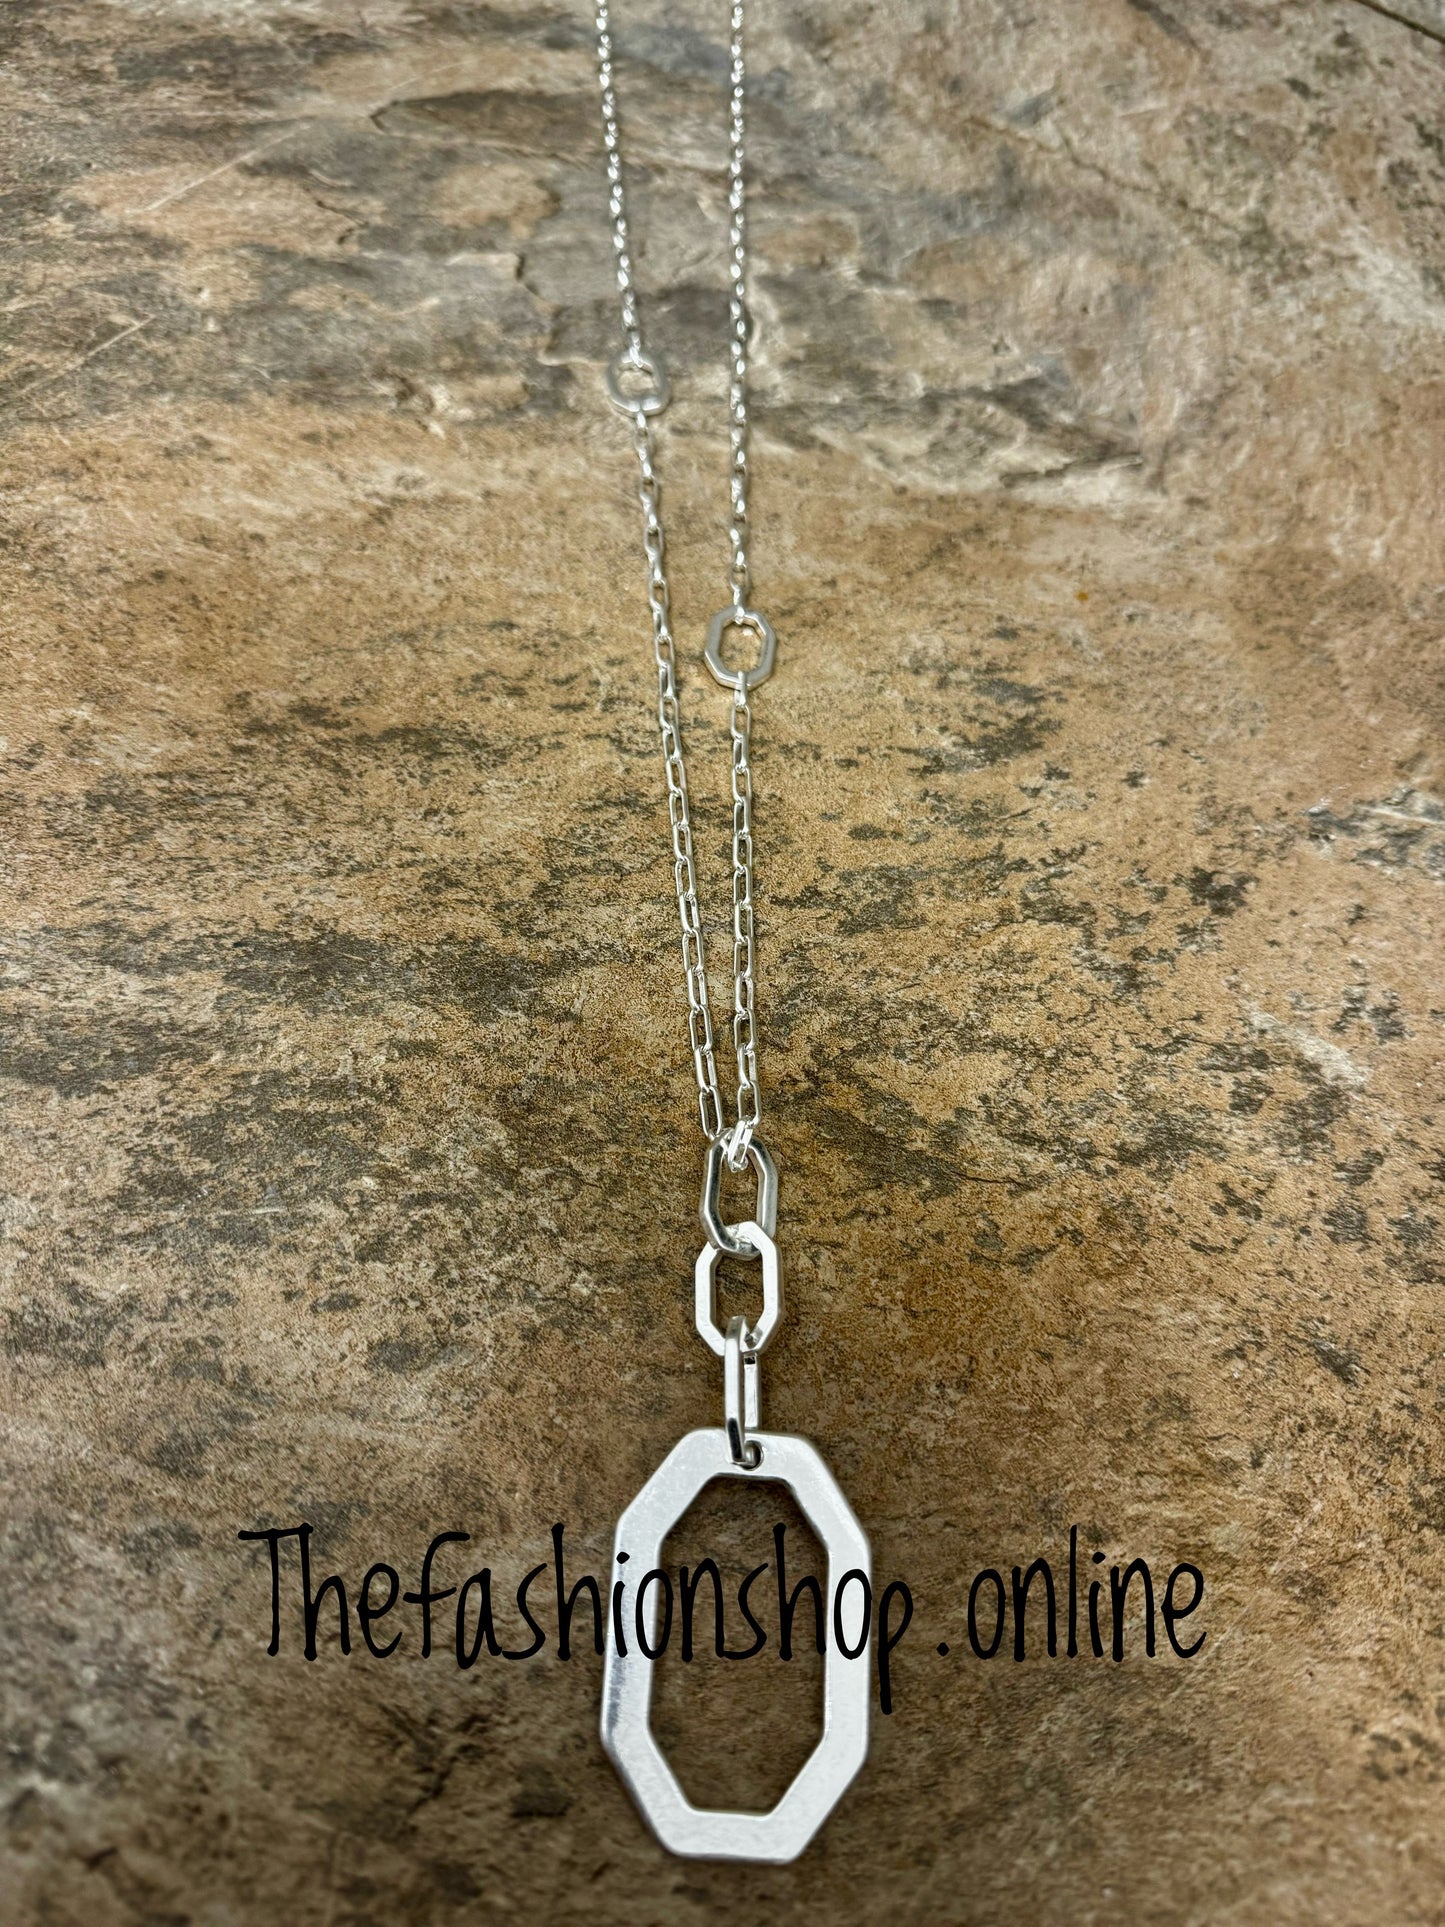 Envy long silver links necklace